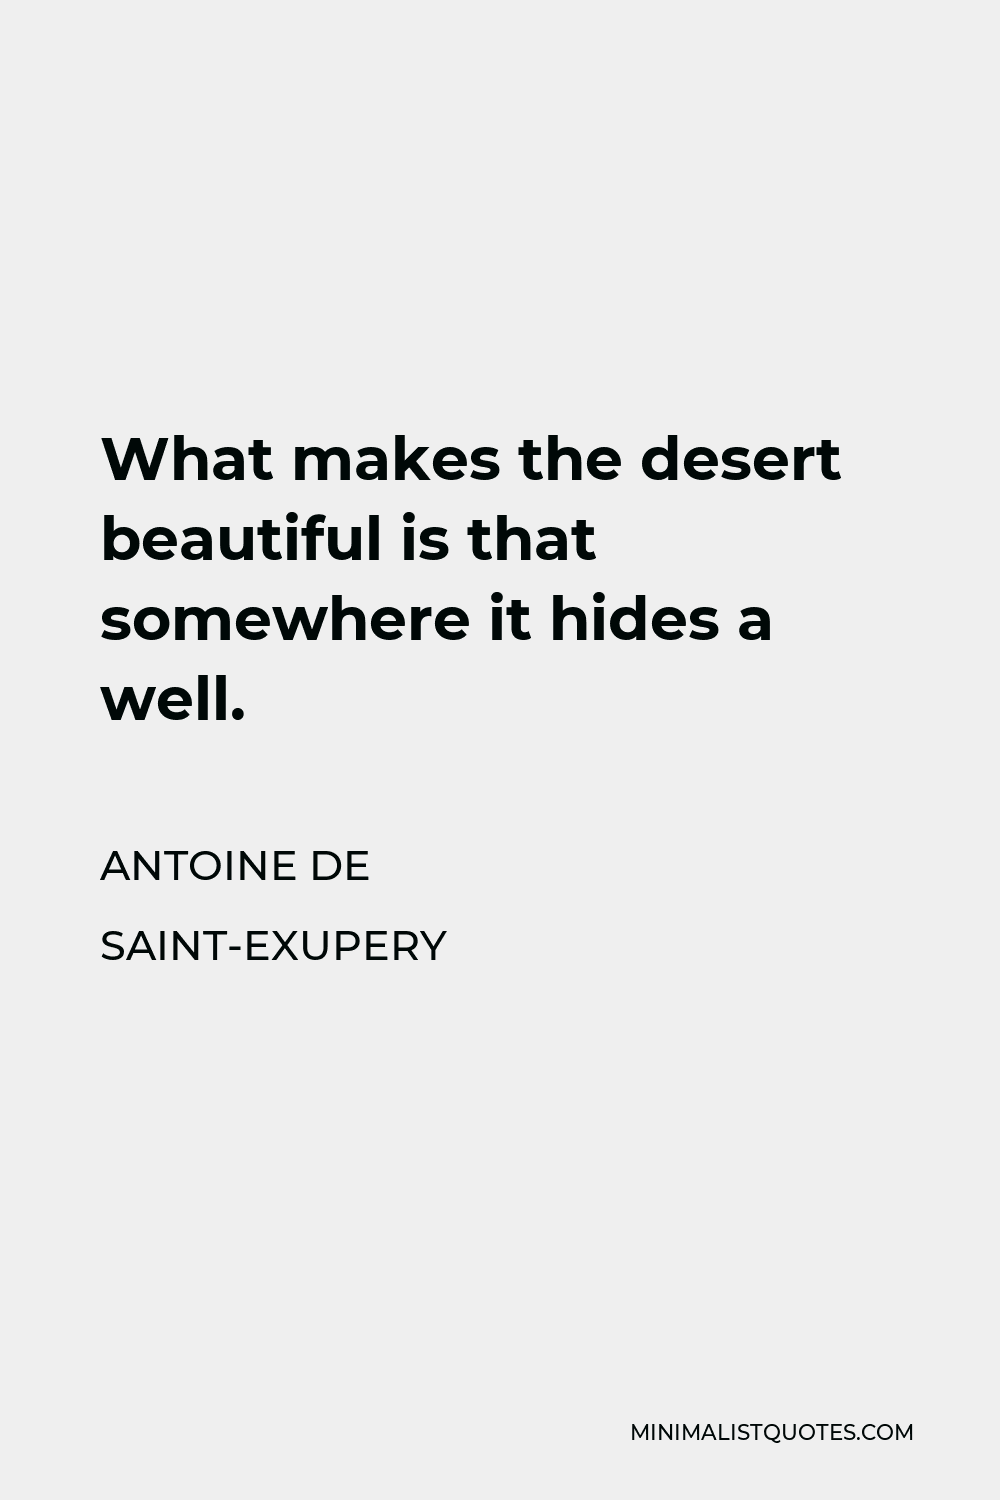 Antoine de Saint-Exupery Quote - What makes the desert beautiful is that somewhere it hides a well.